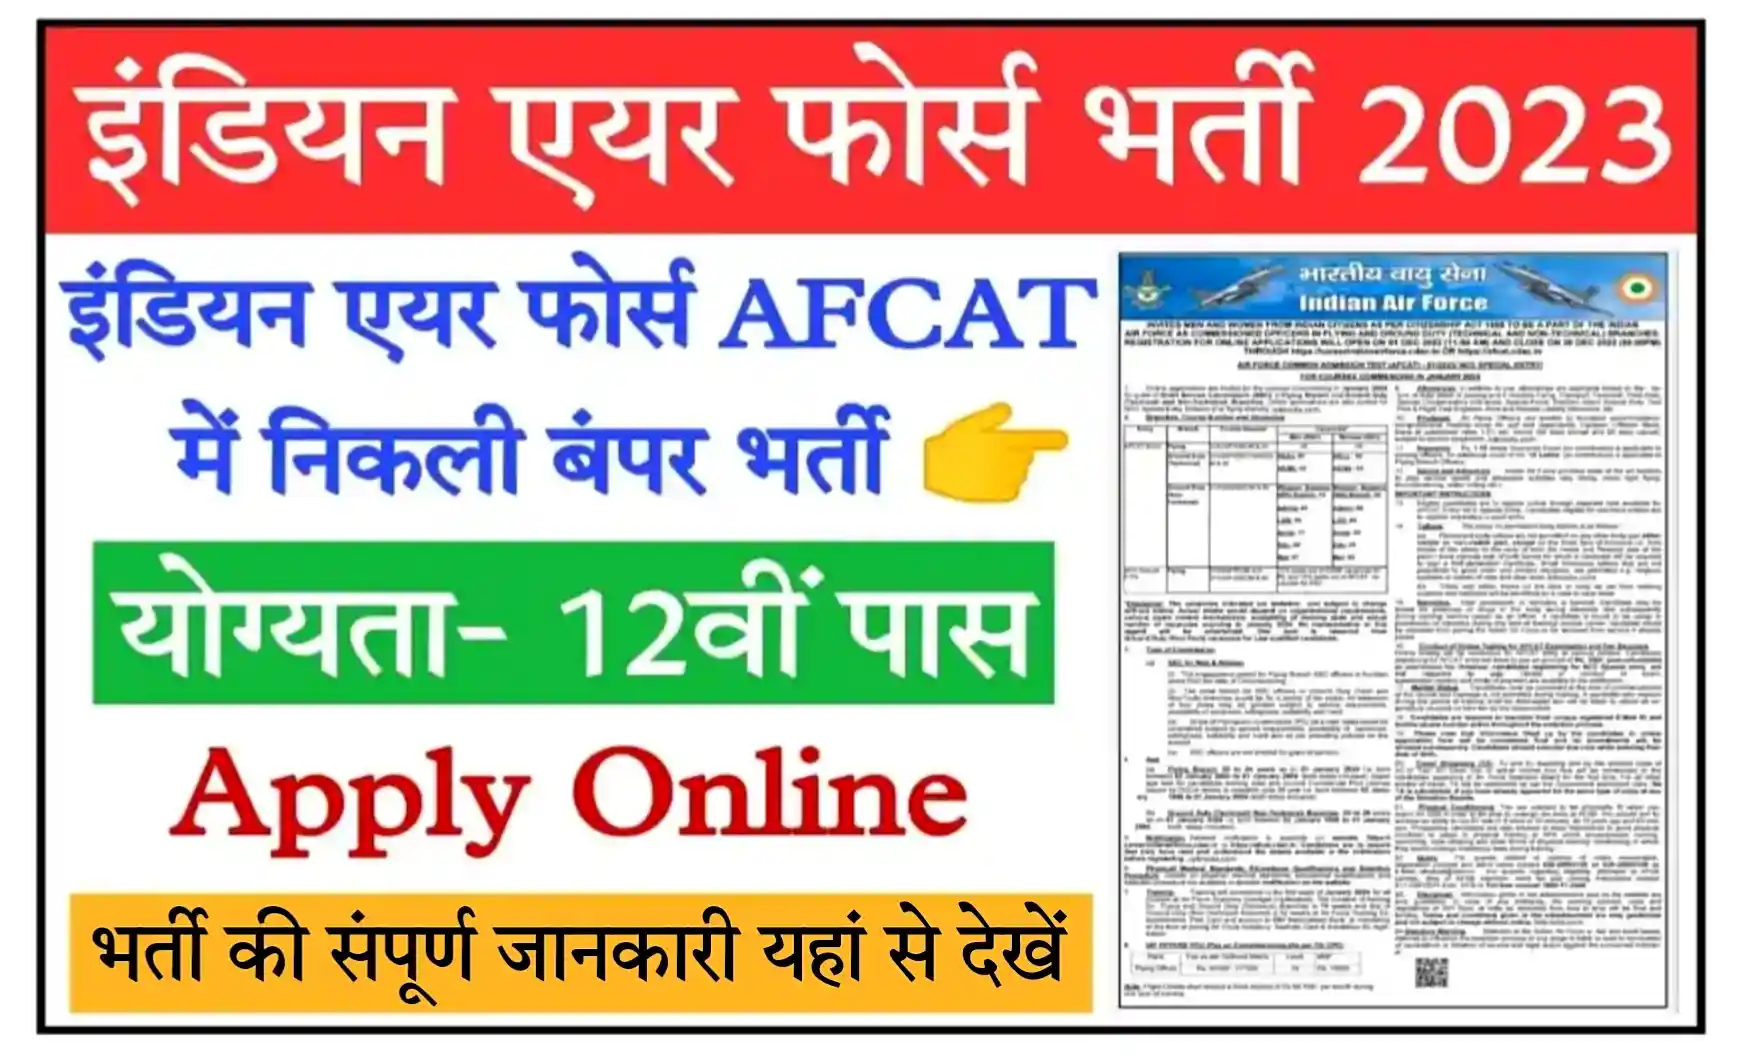 Indian Air Force AFCAT Recruitment 2023 Notification, Apply Online, Qualification 12th Pass